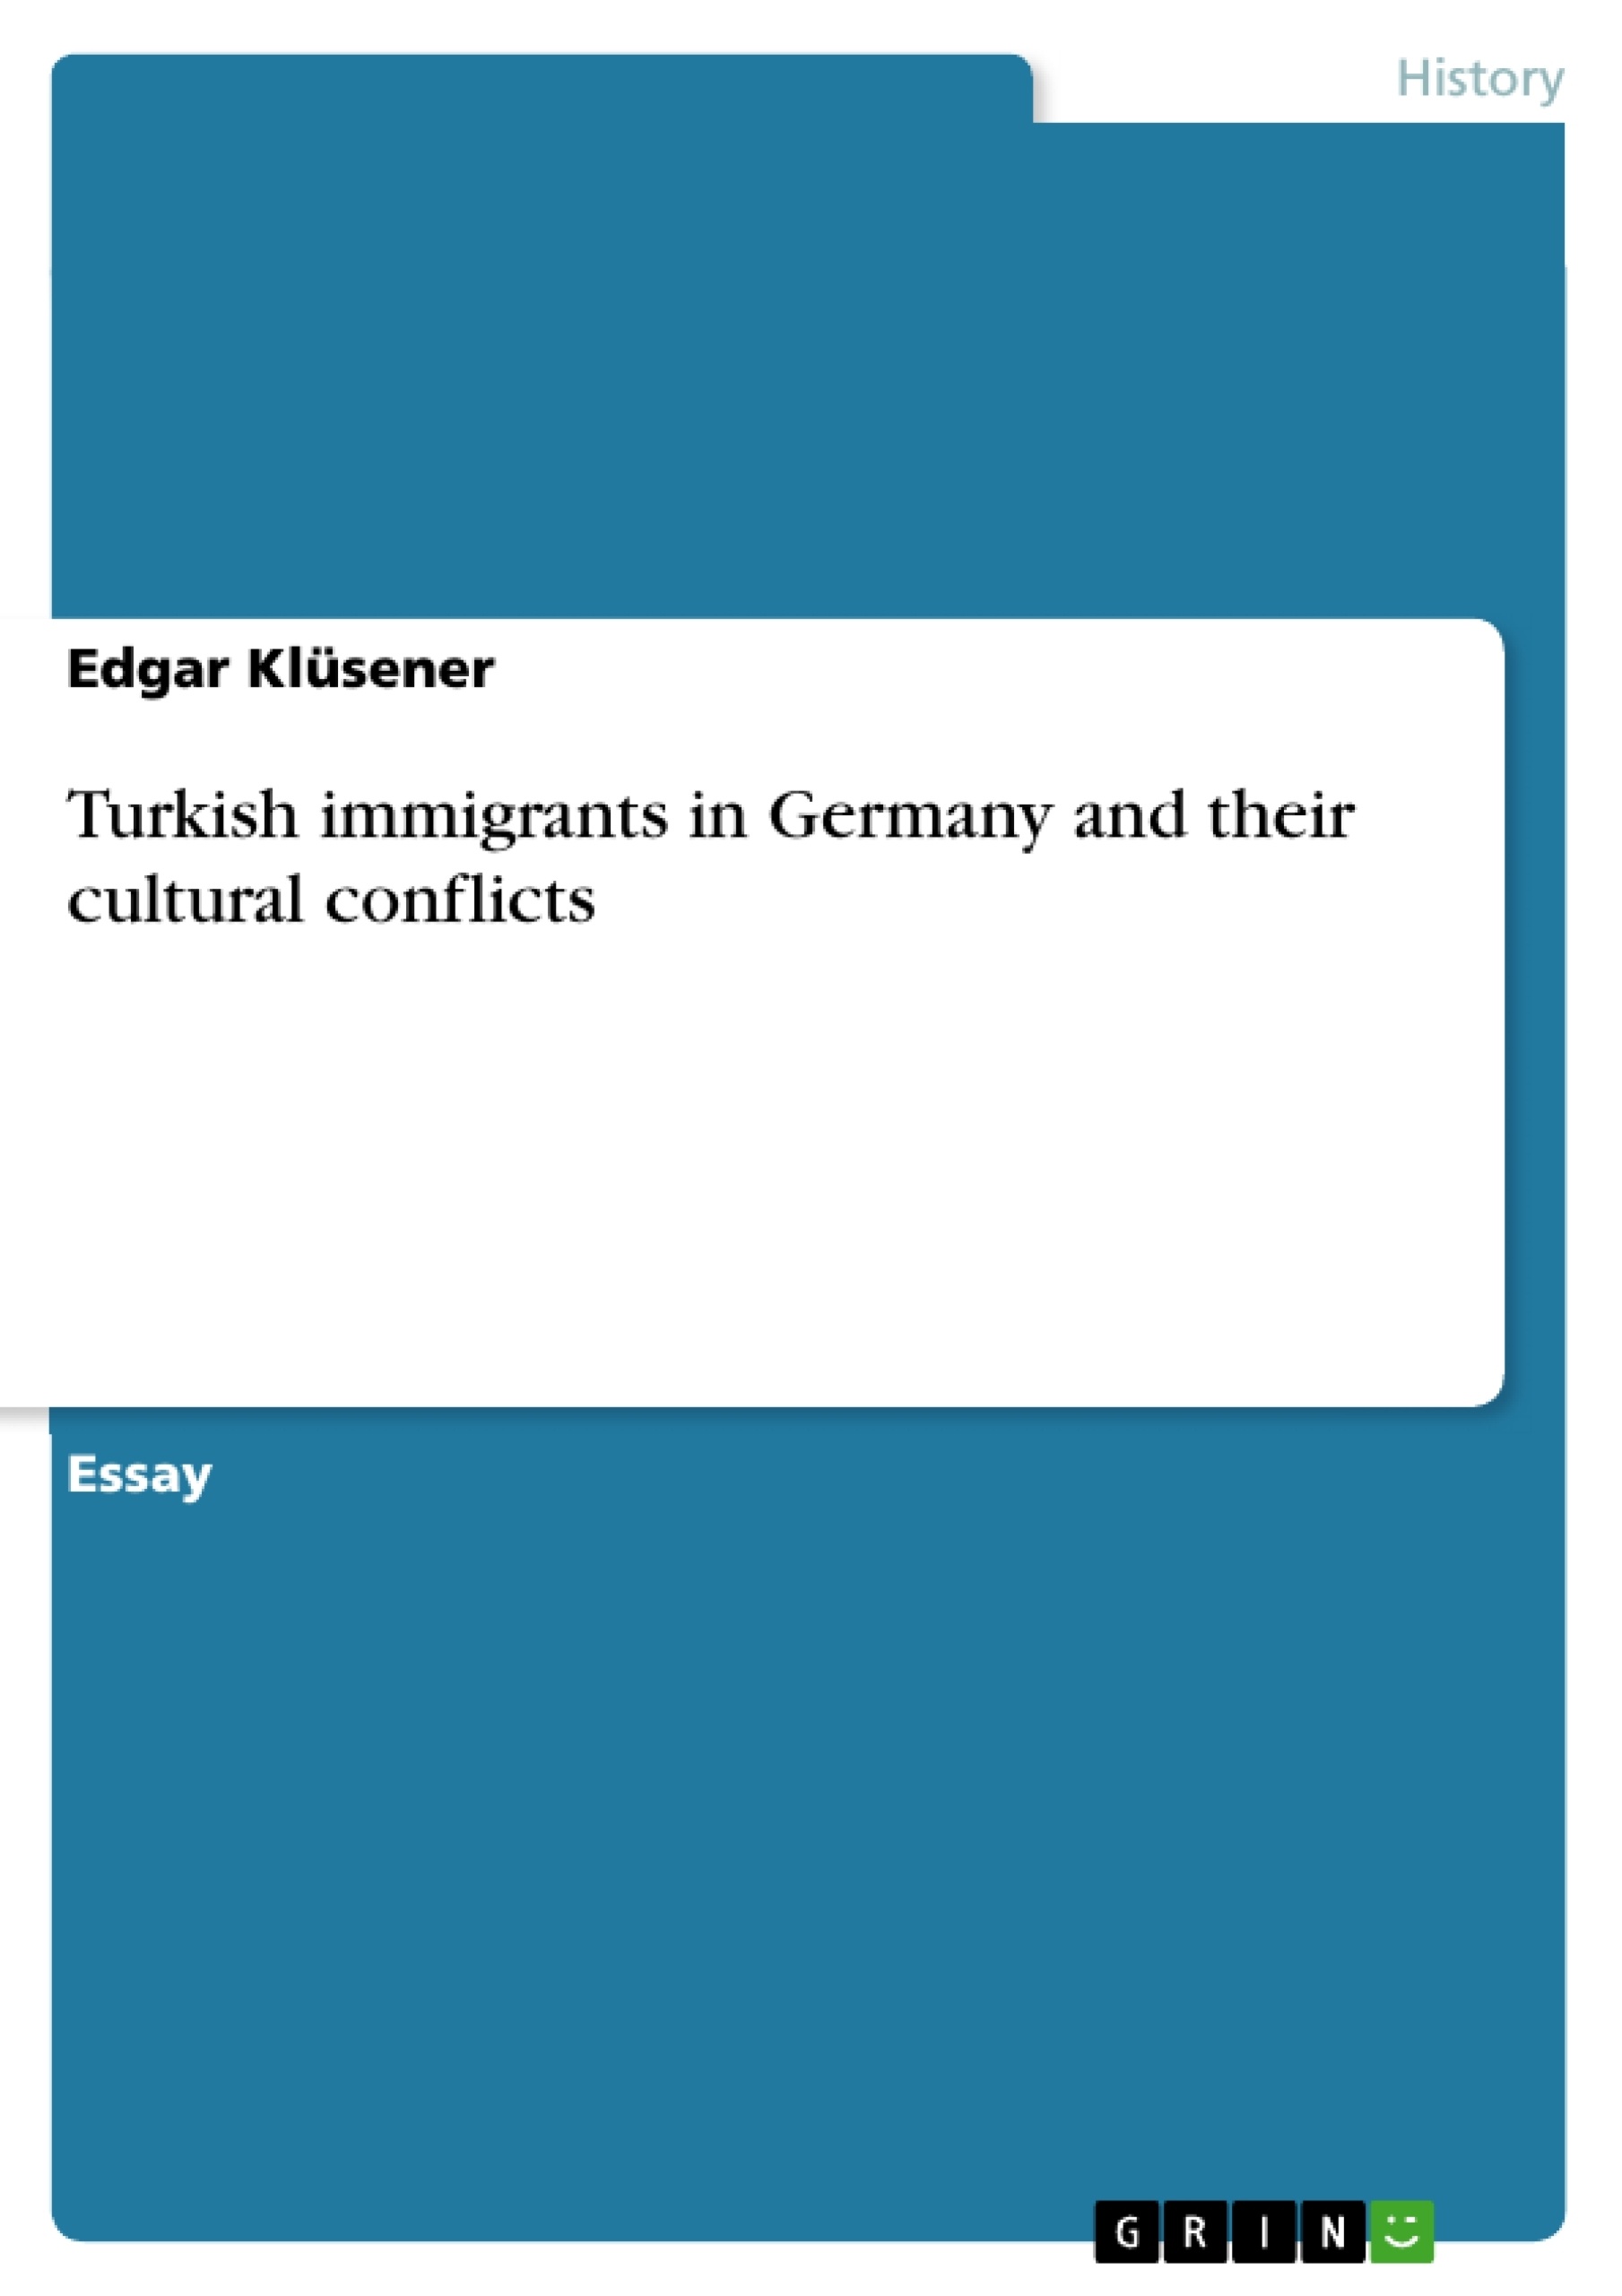 Título: Turkish immigrants in Germany and their cultural conflicts